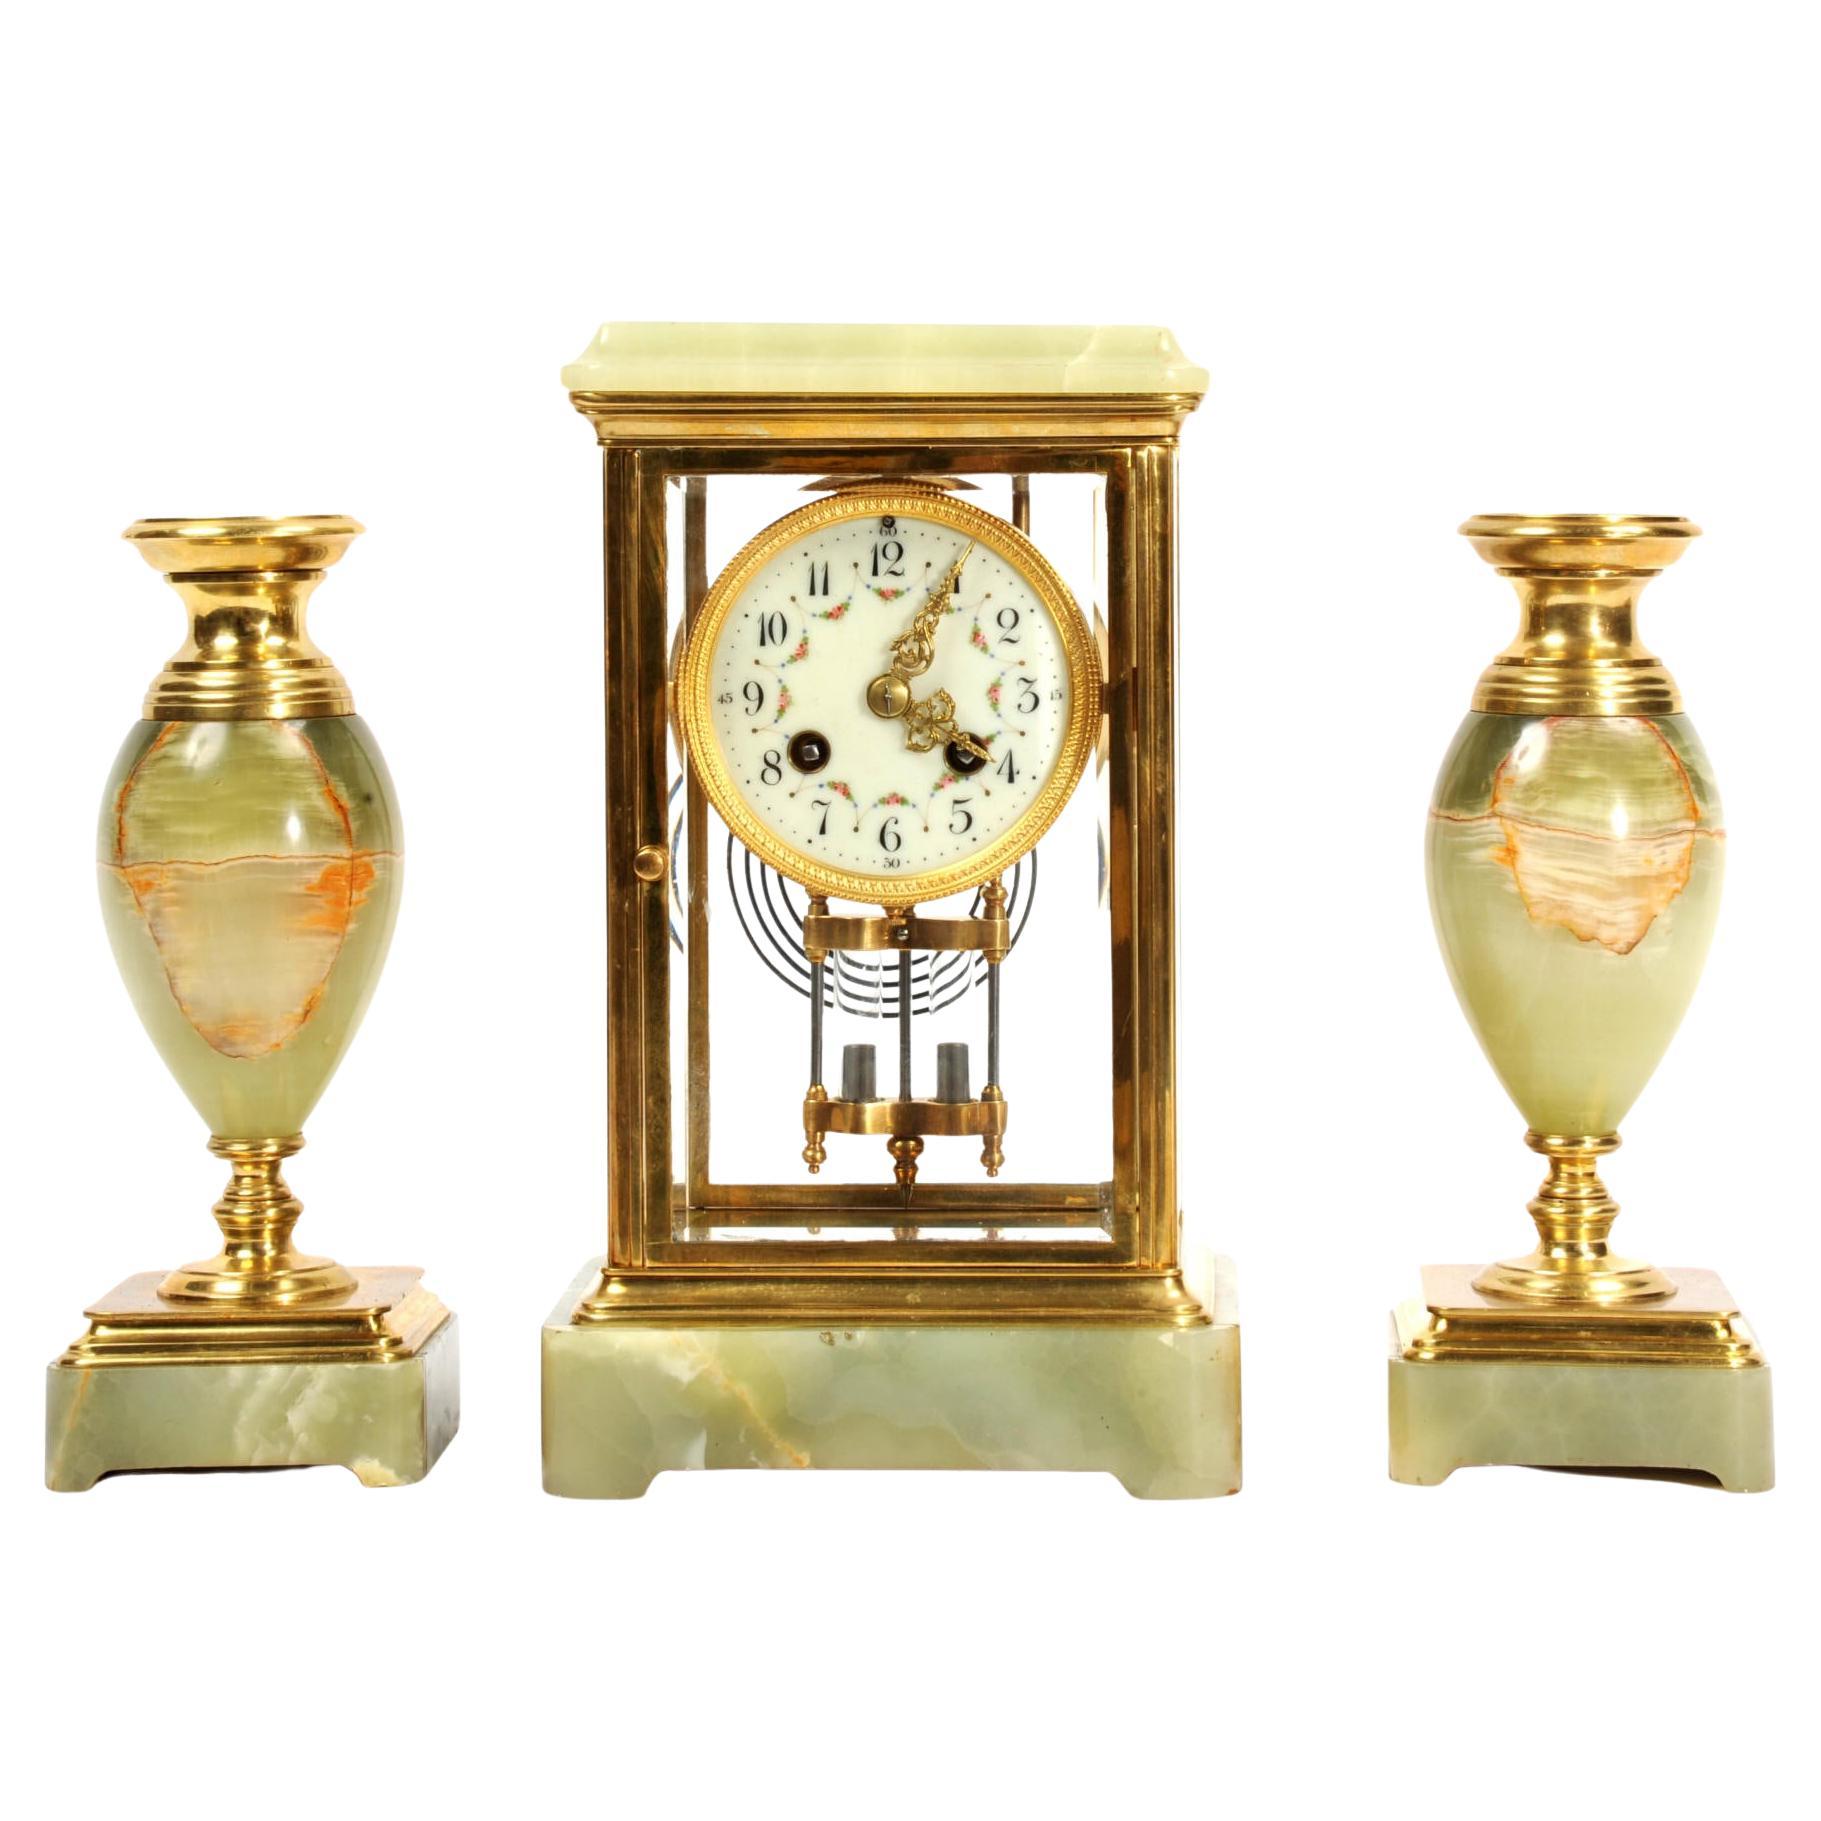 Antique French Four Glass Crystal Regulator Clock Set in Onyx and Ormolu